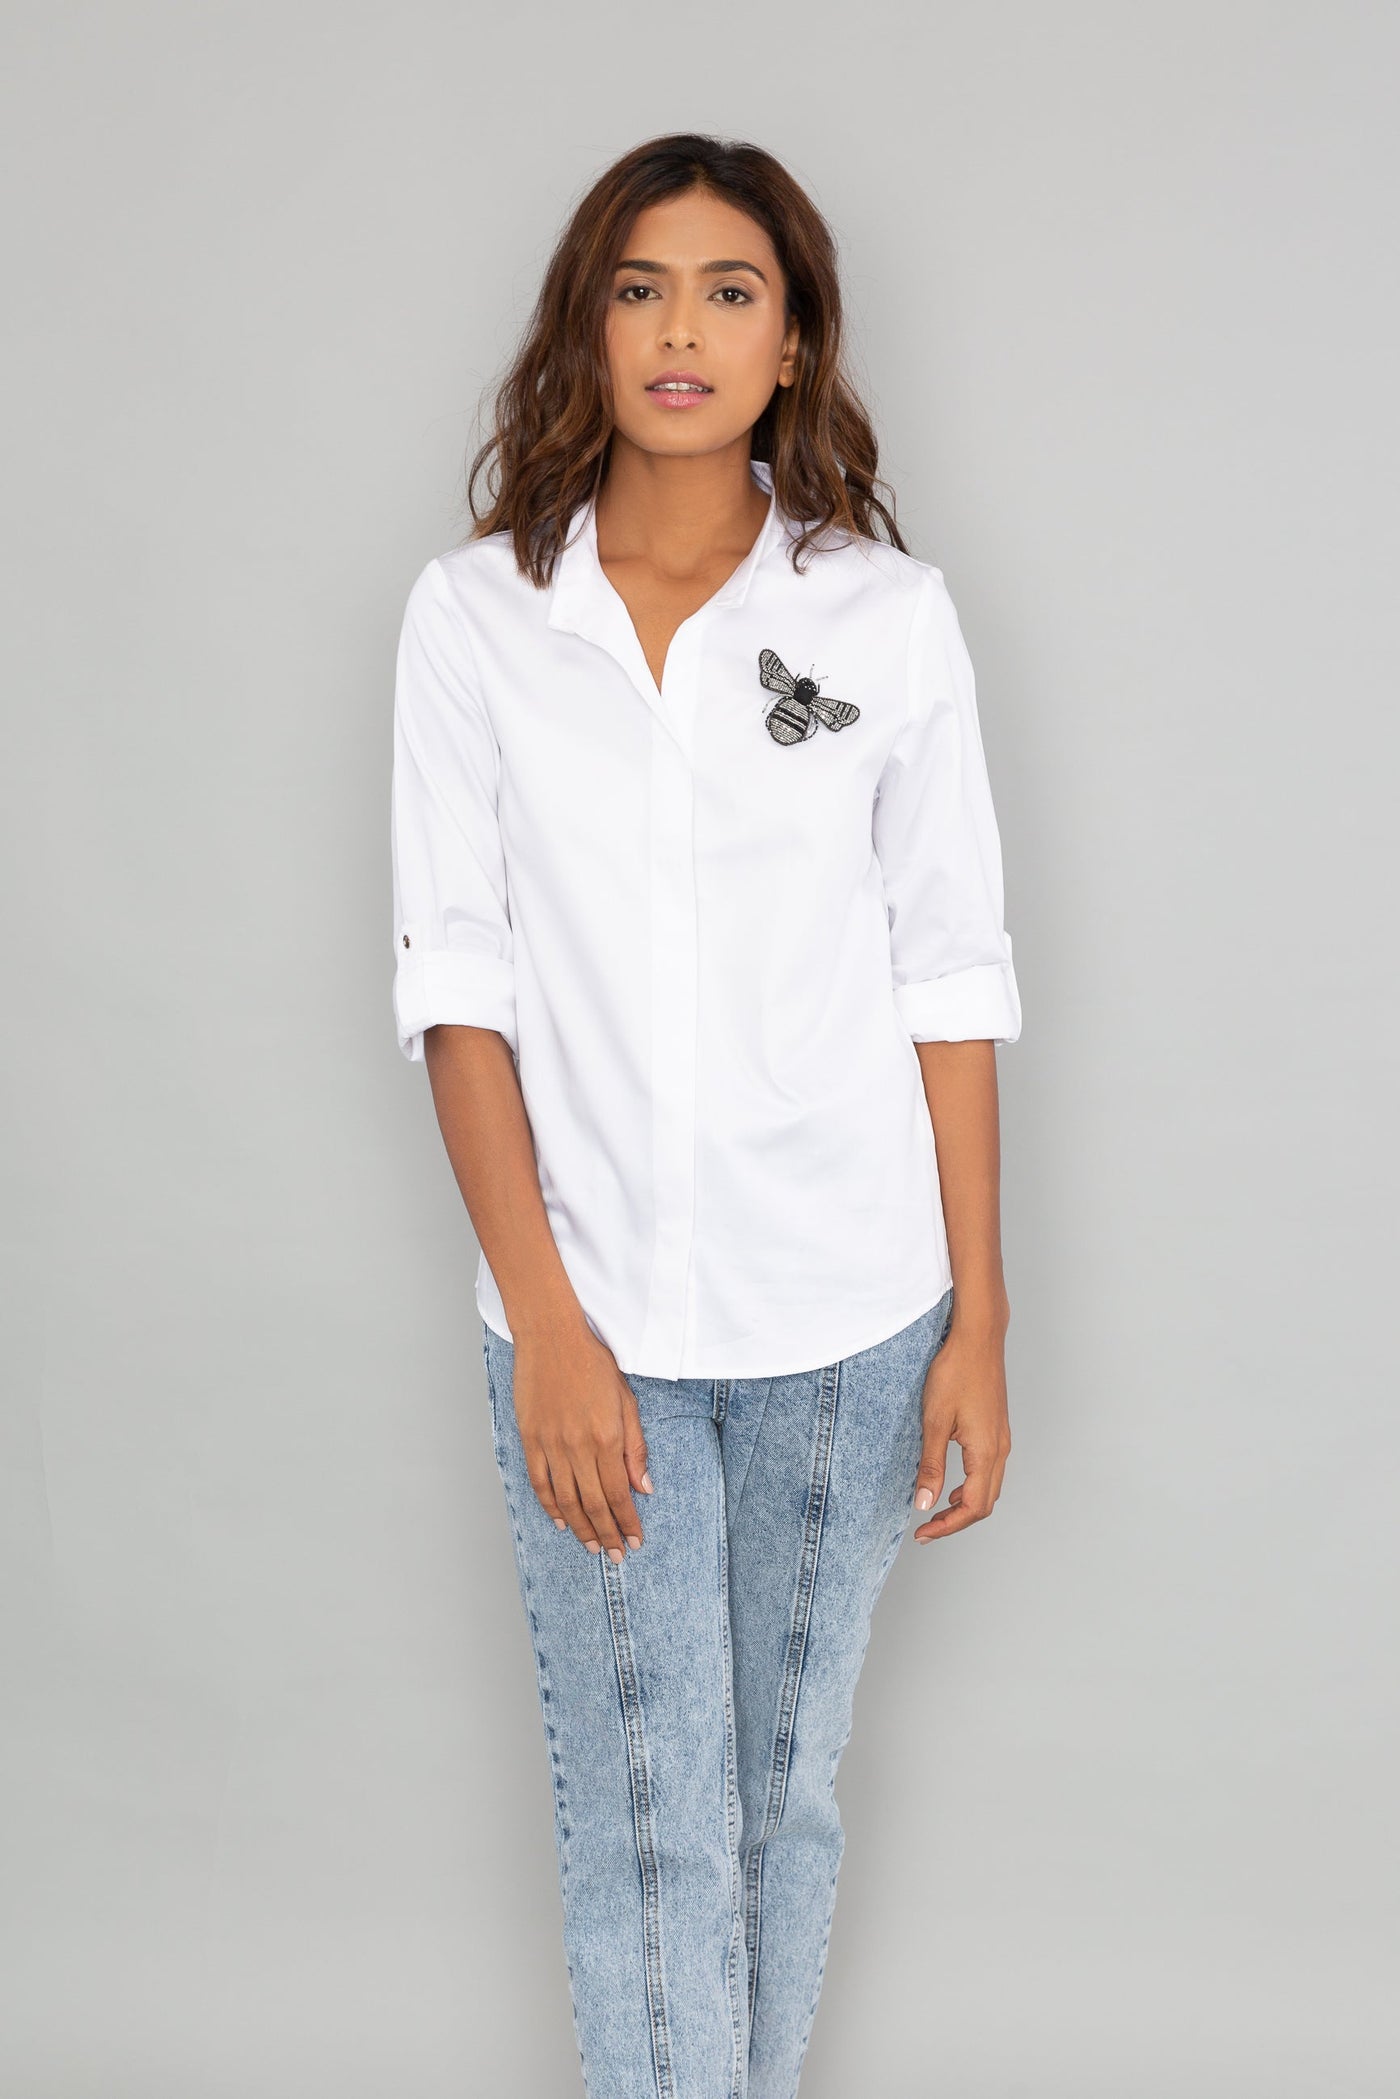 Classic White Shirt With PLV Brooch